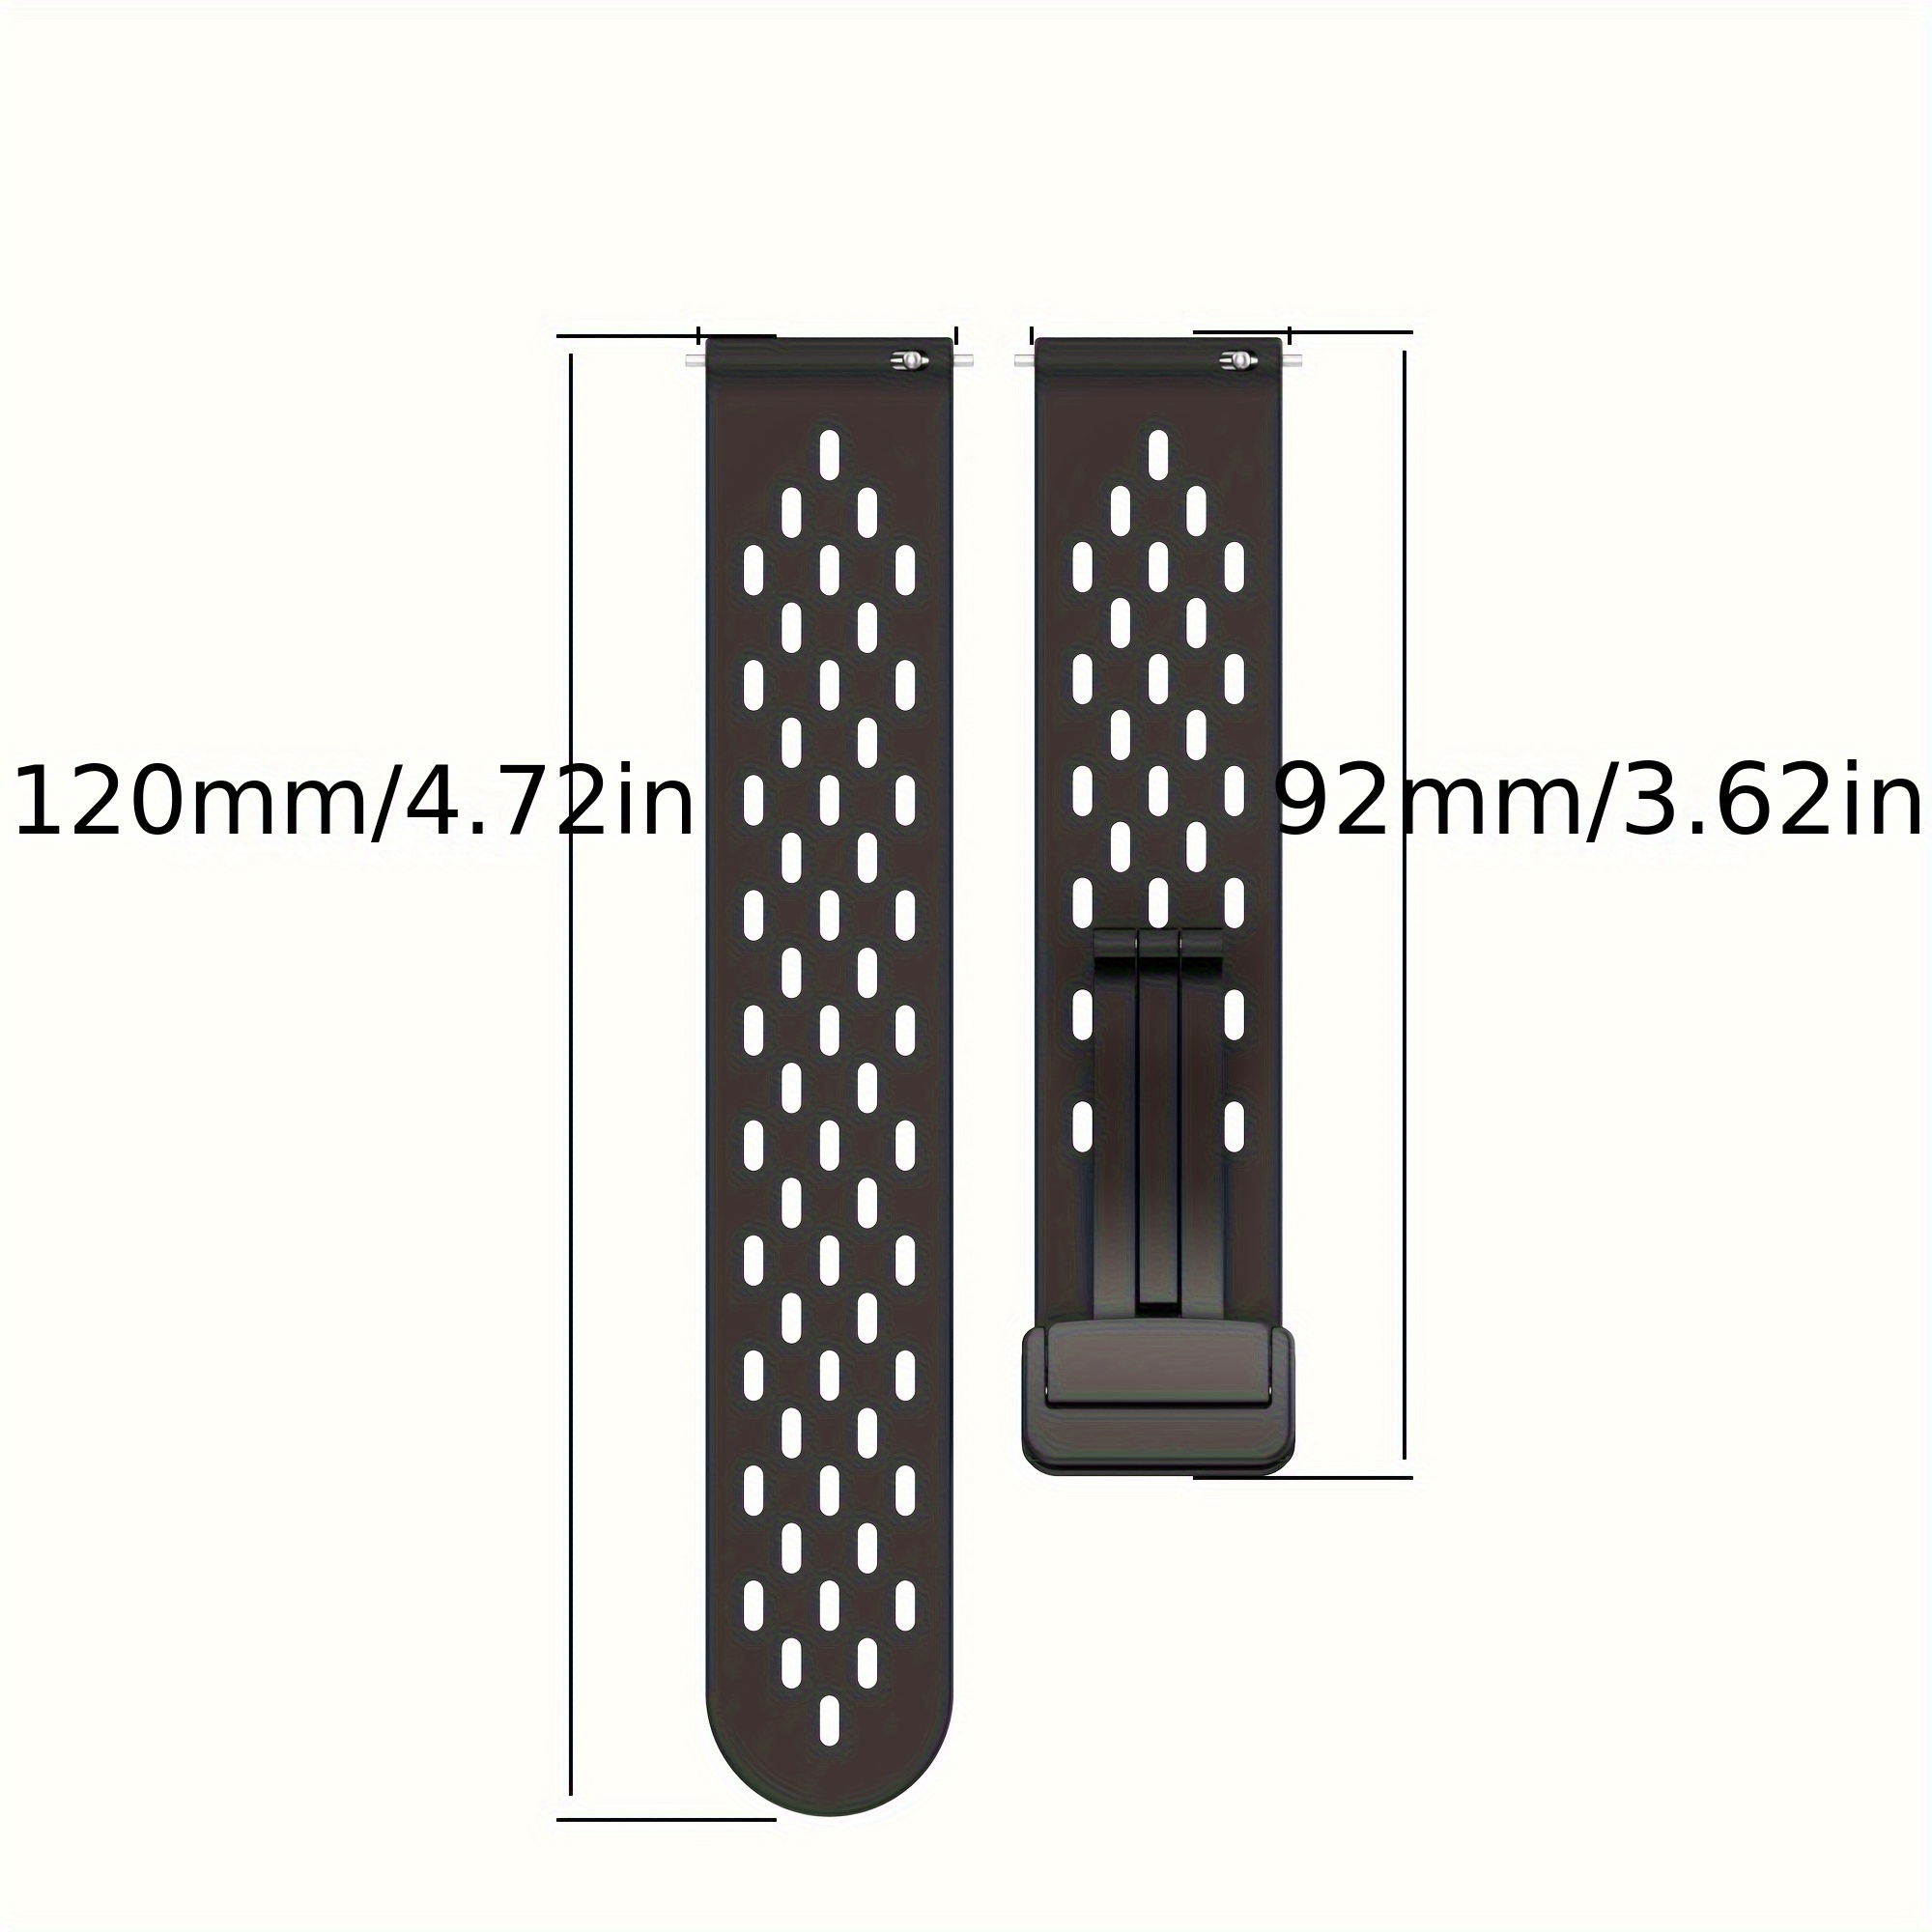 Magnetic Silicone Strap For Samsung Galaxy Watch 5 Pro 45mm/4